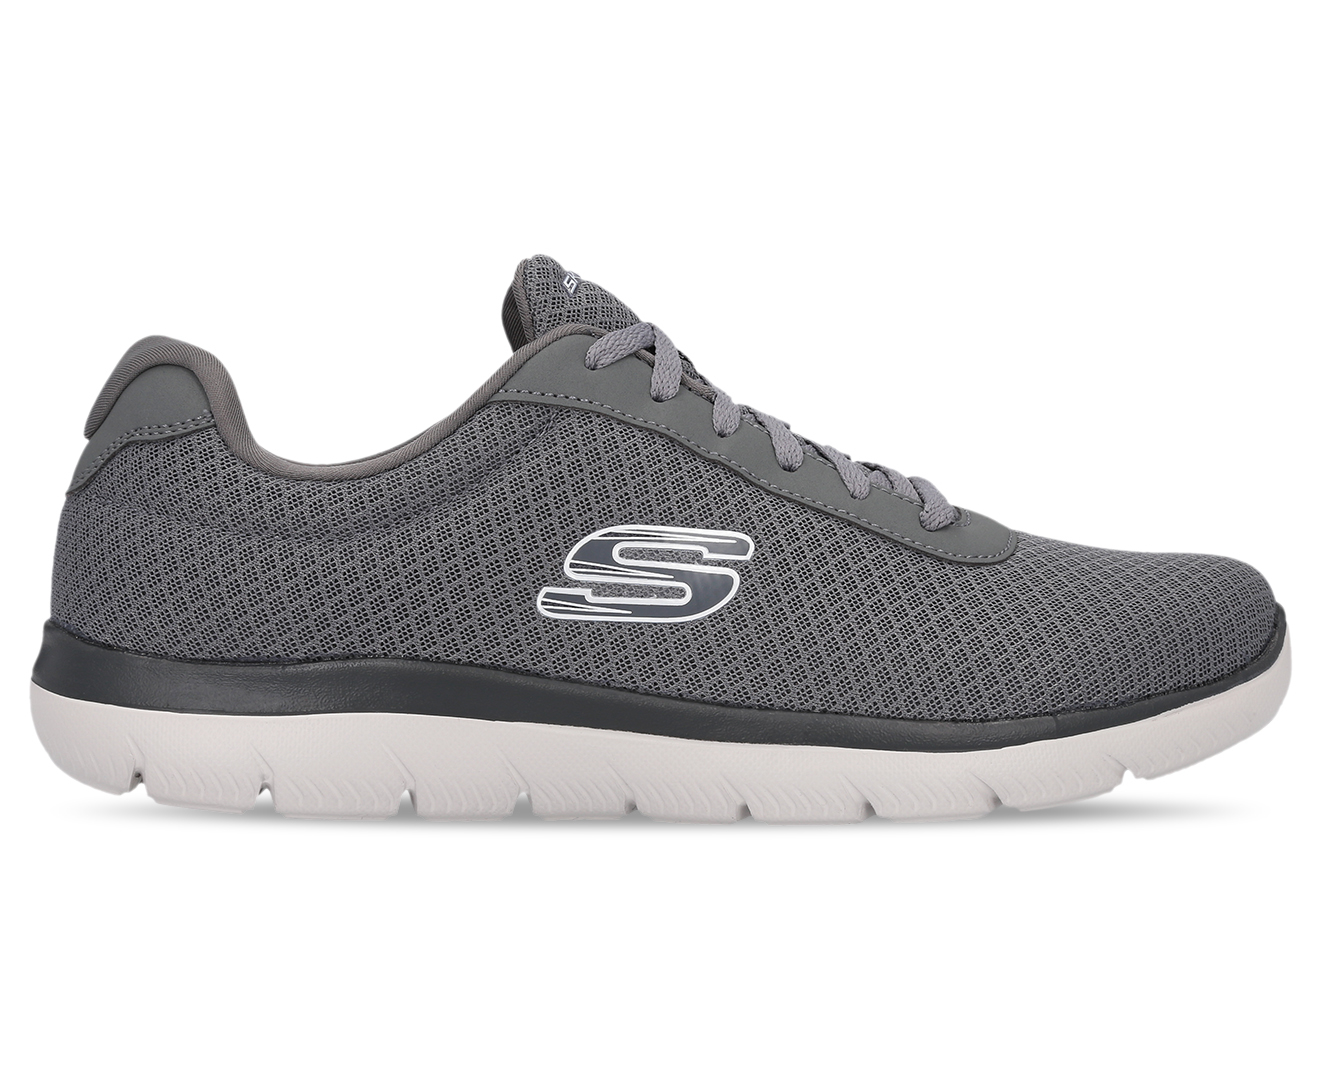 Skechers Men's Summits - Field Day Sports Training Shoes - Charcoal ...